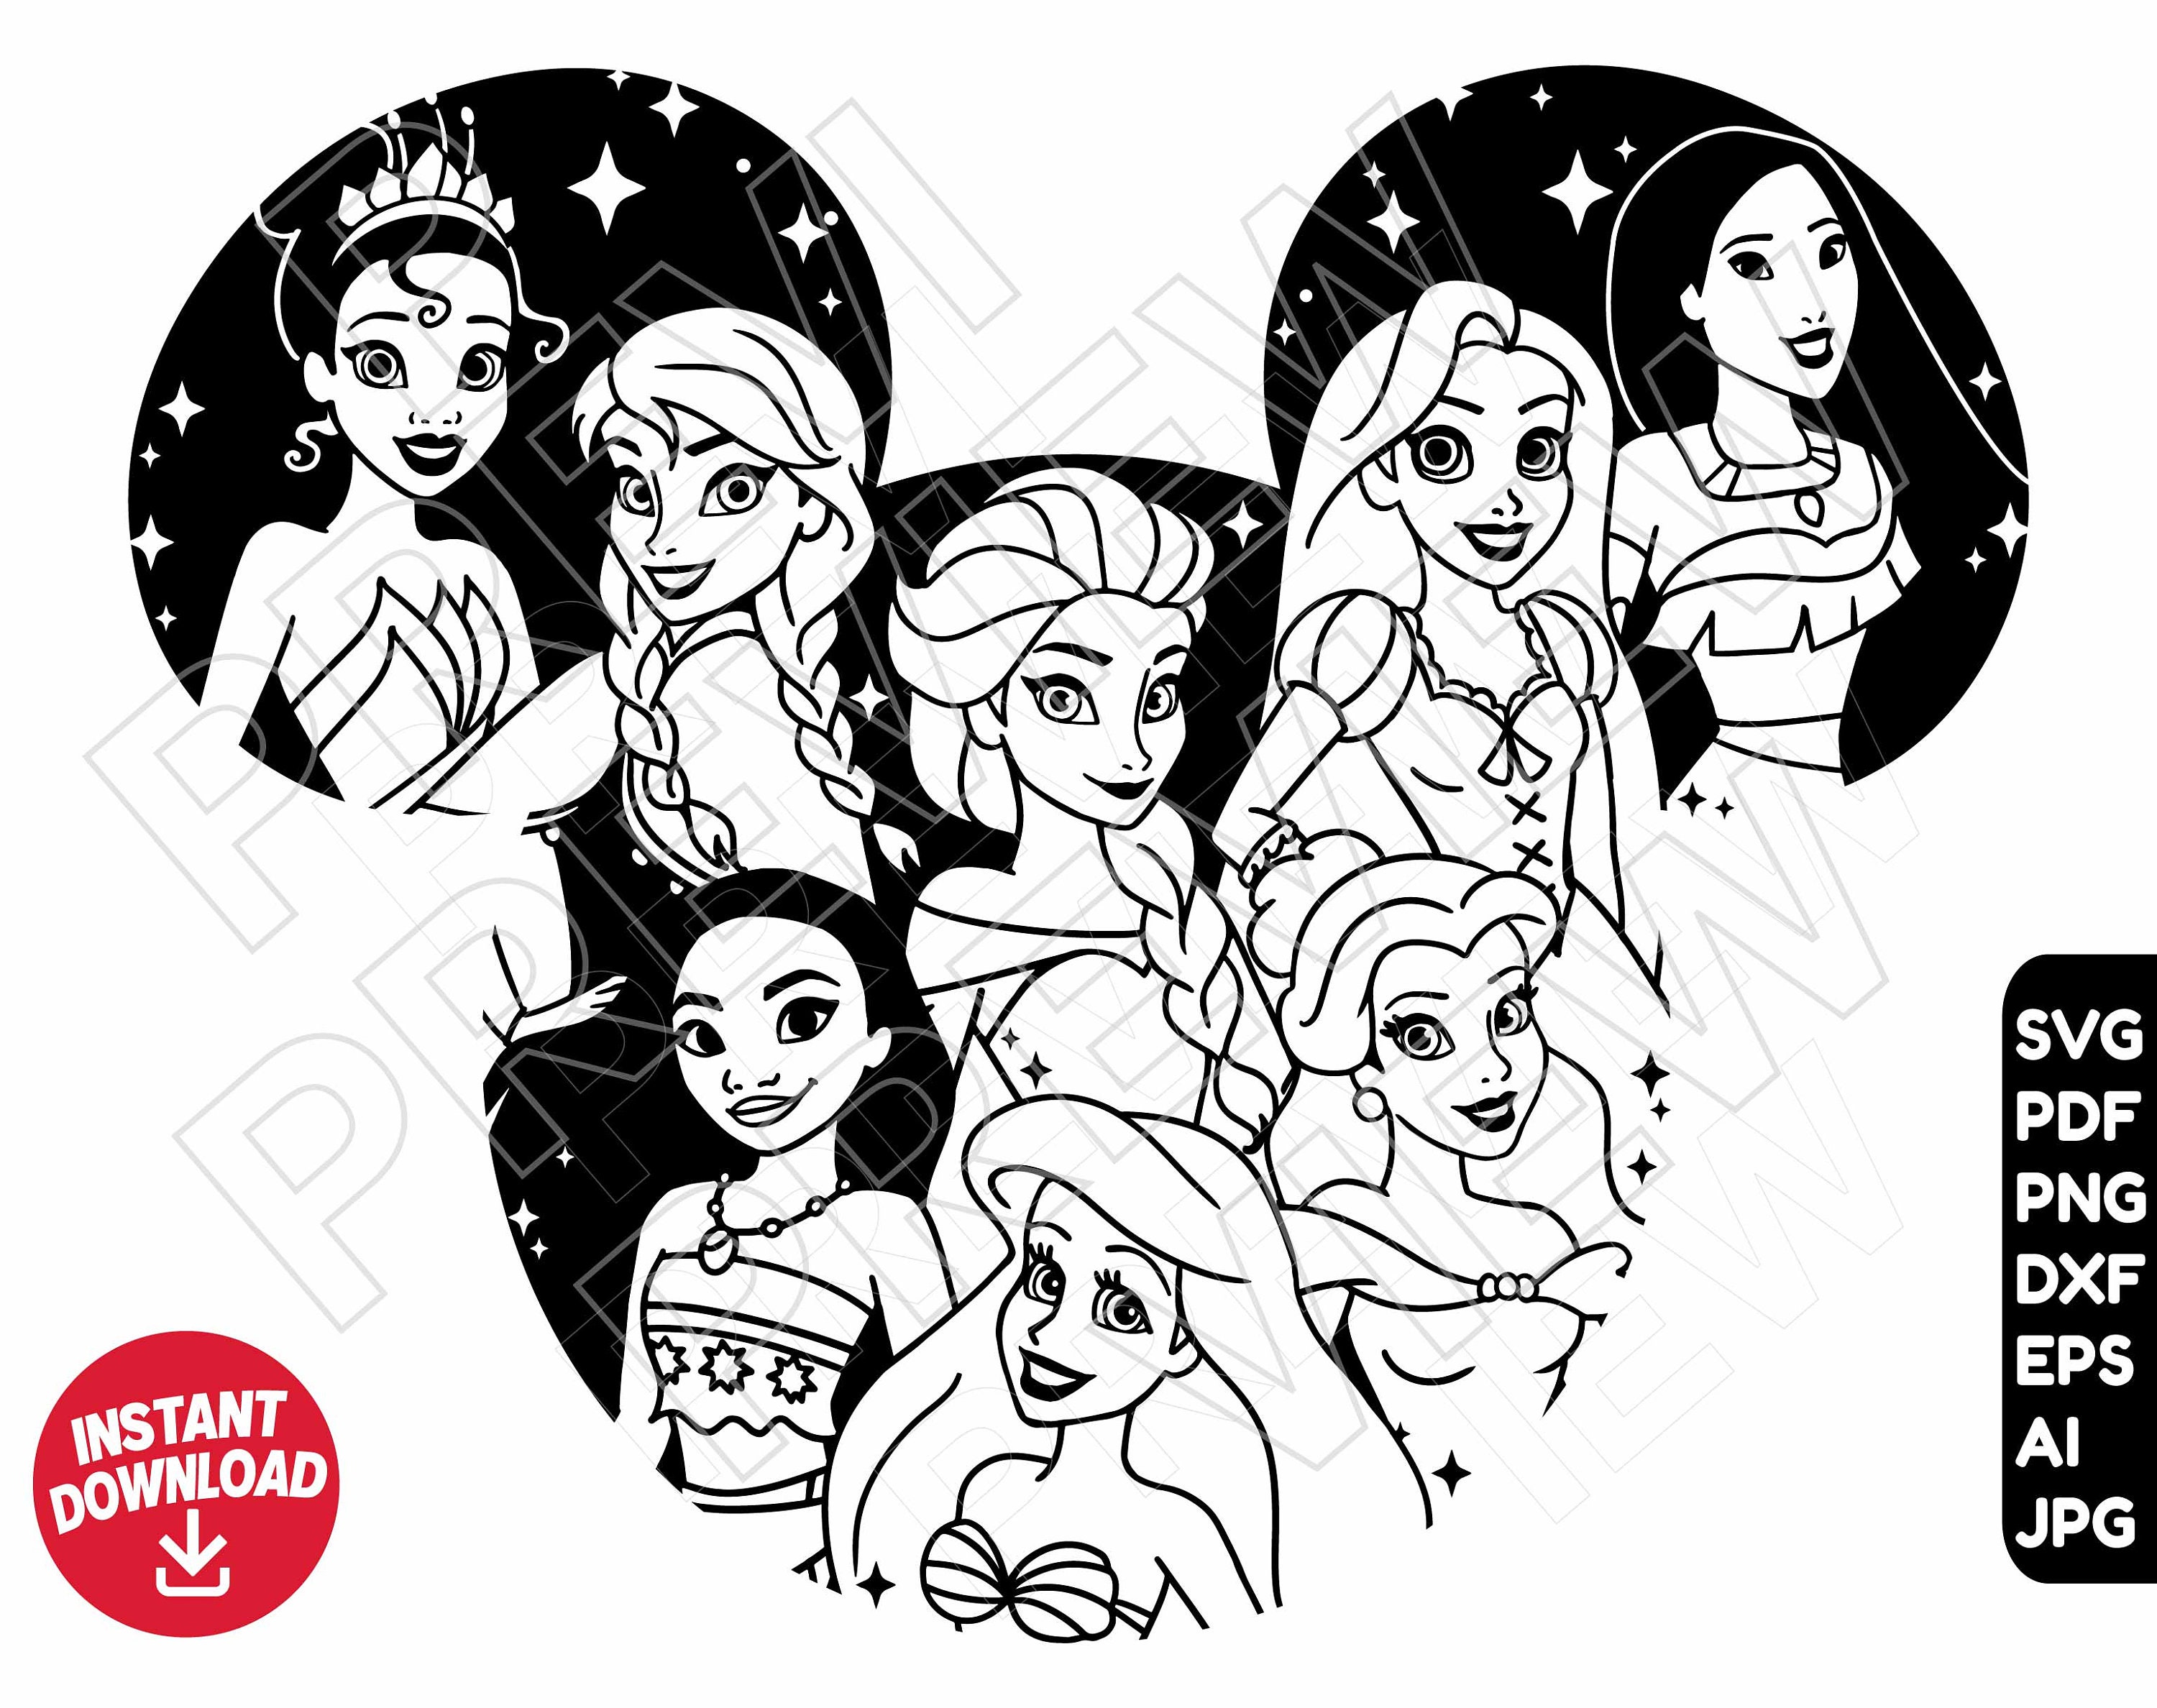 Disney Princess Coloring Book Super Set -- Bundle Includes 4 Disney  Princess Books Filled with Over 600 Stickers and Activities (Party Set)  (Color: Disney Princess, Tamaño: Super Set (3 Books))